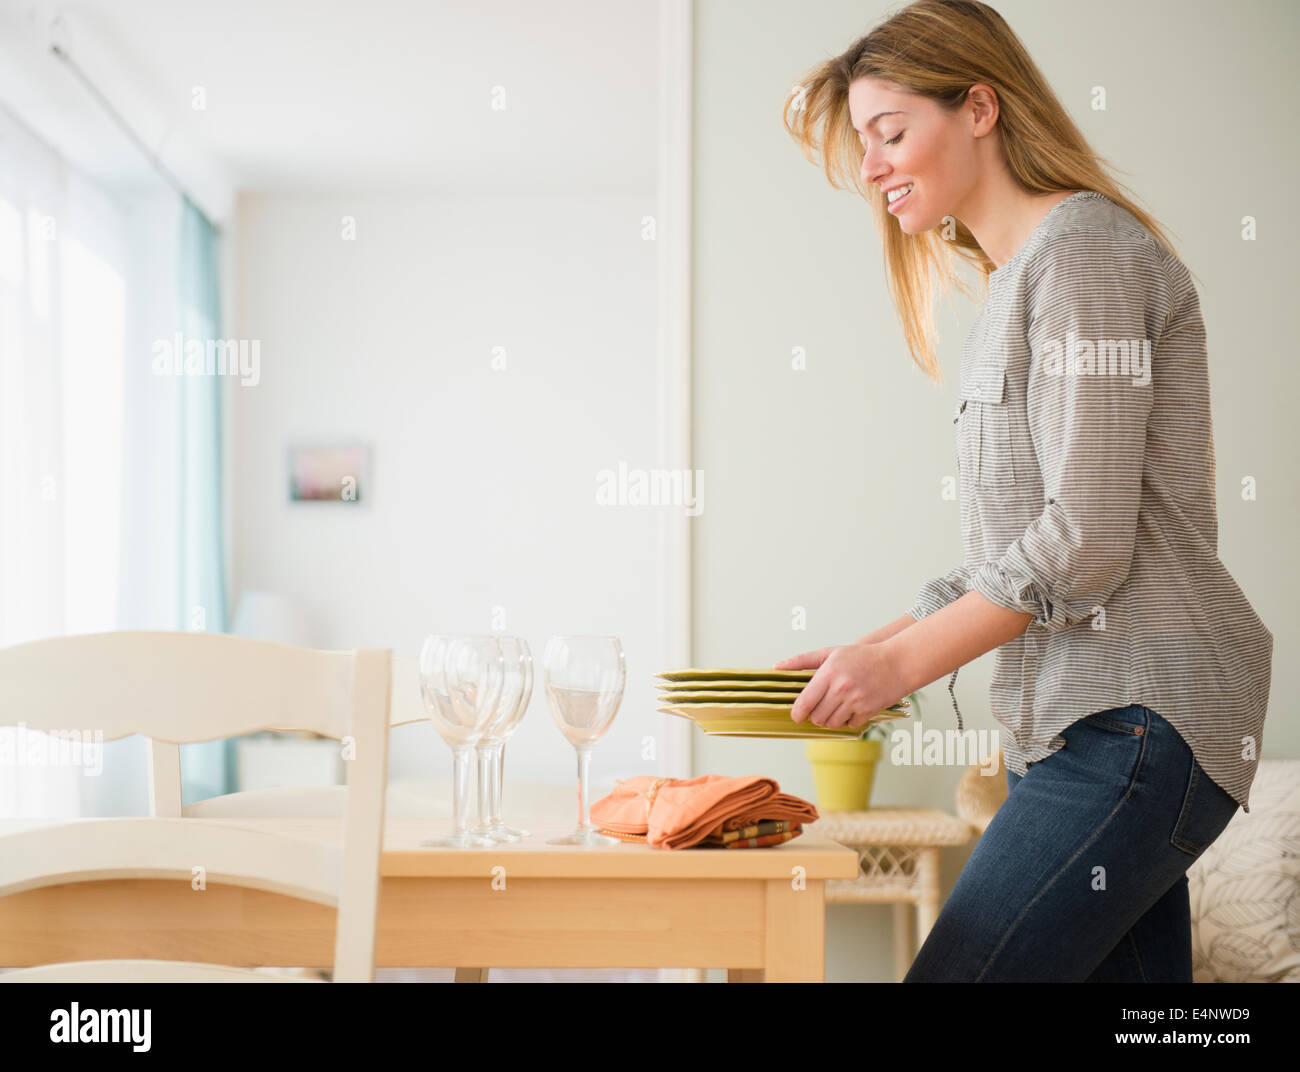 Young woman setting table Stock Photo